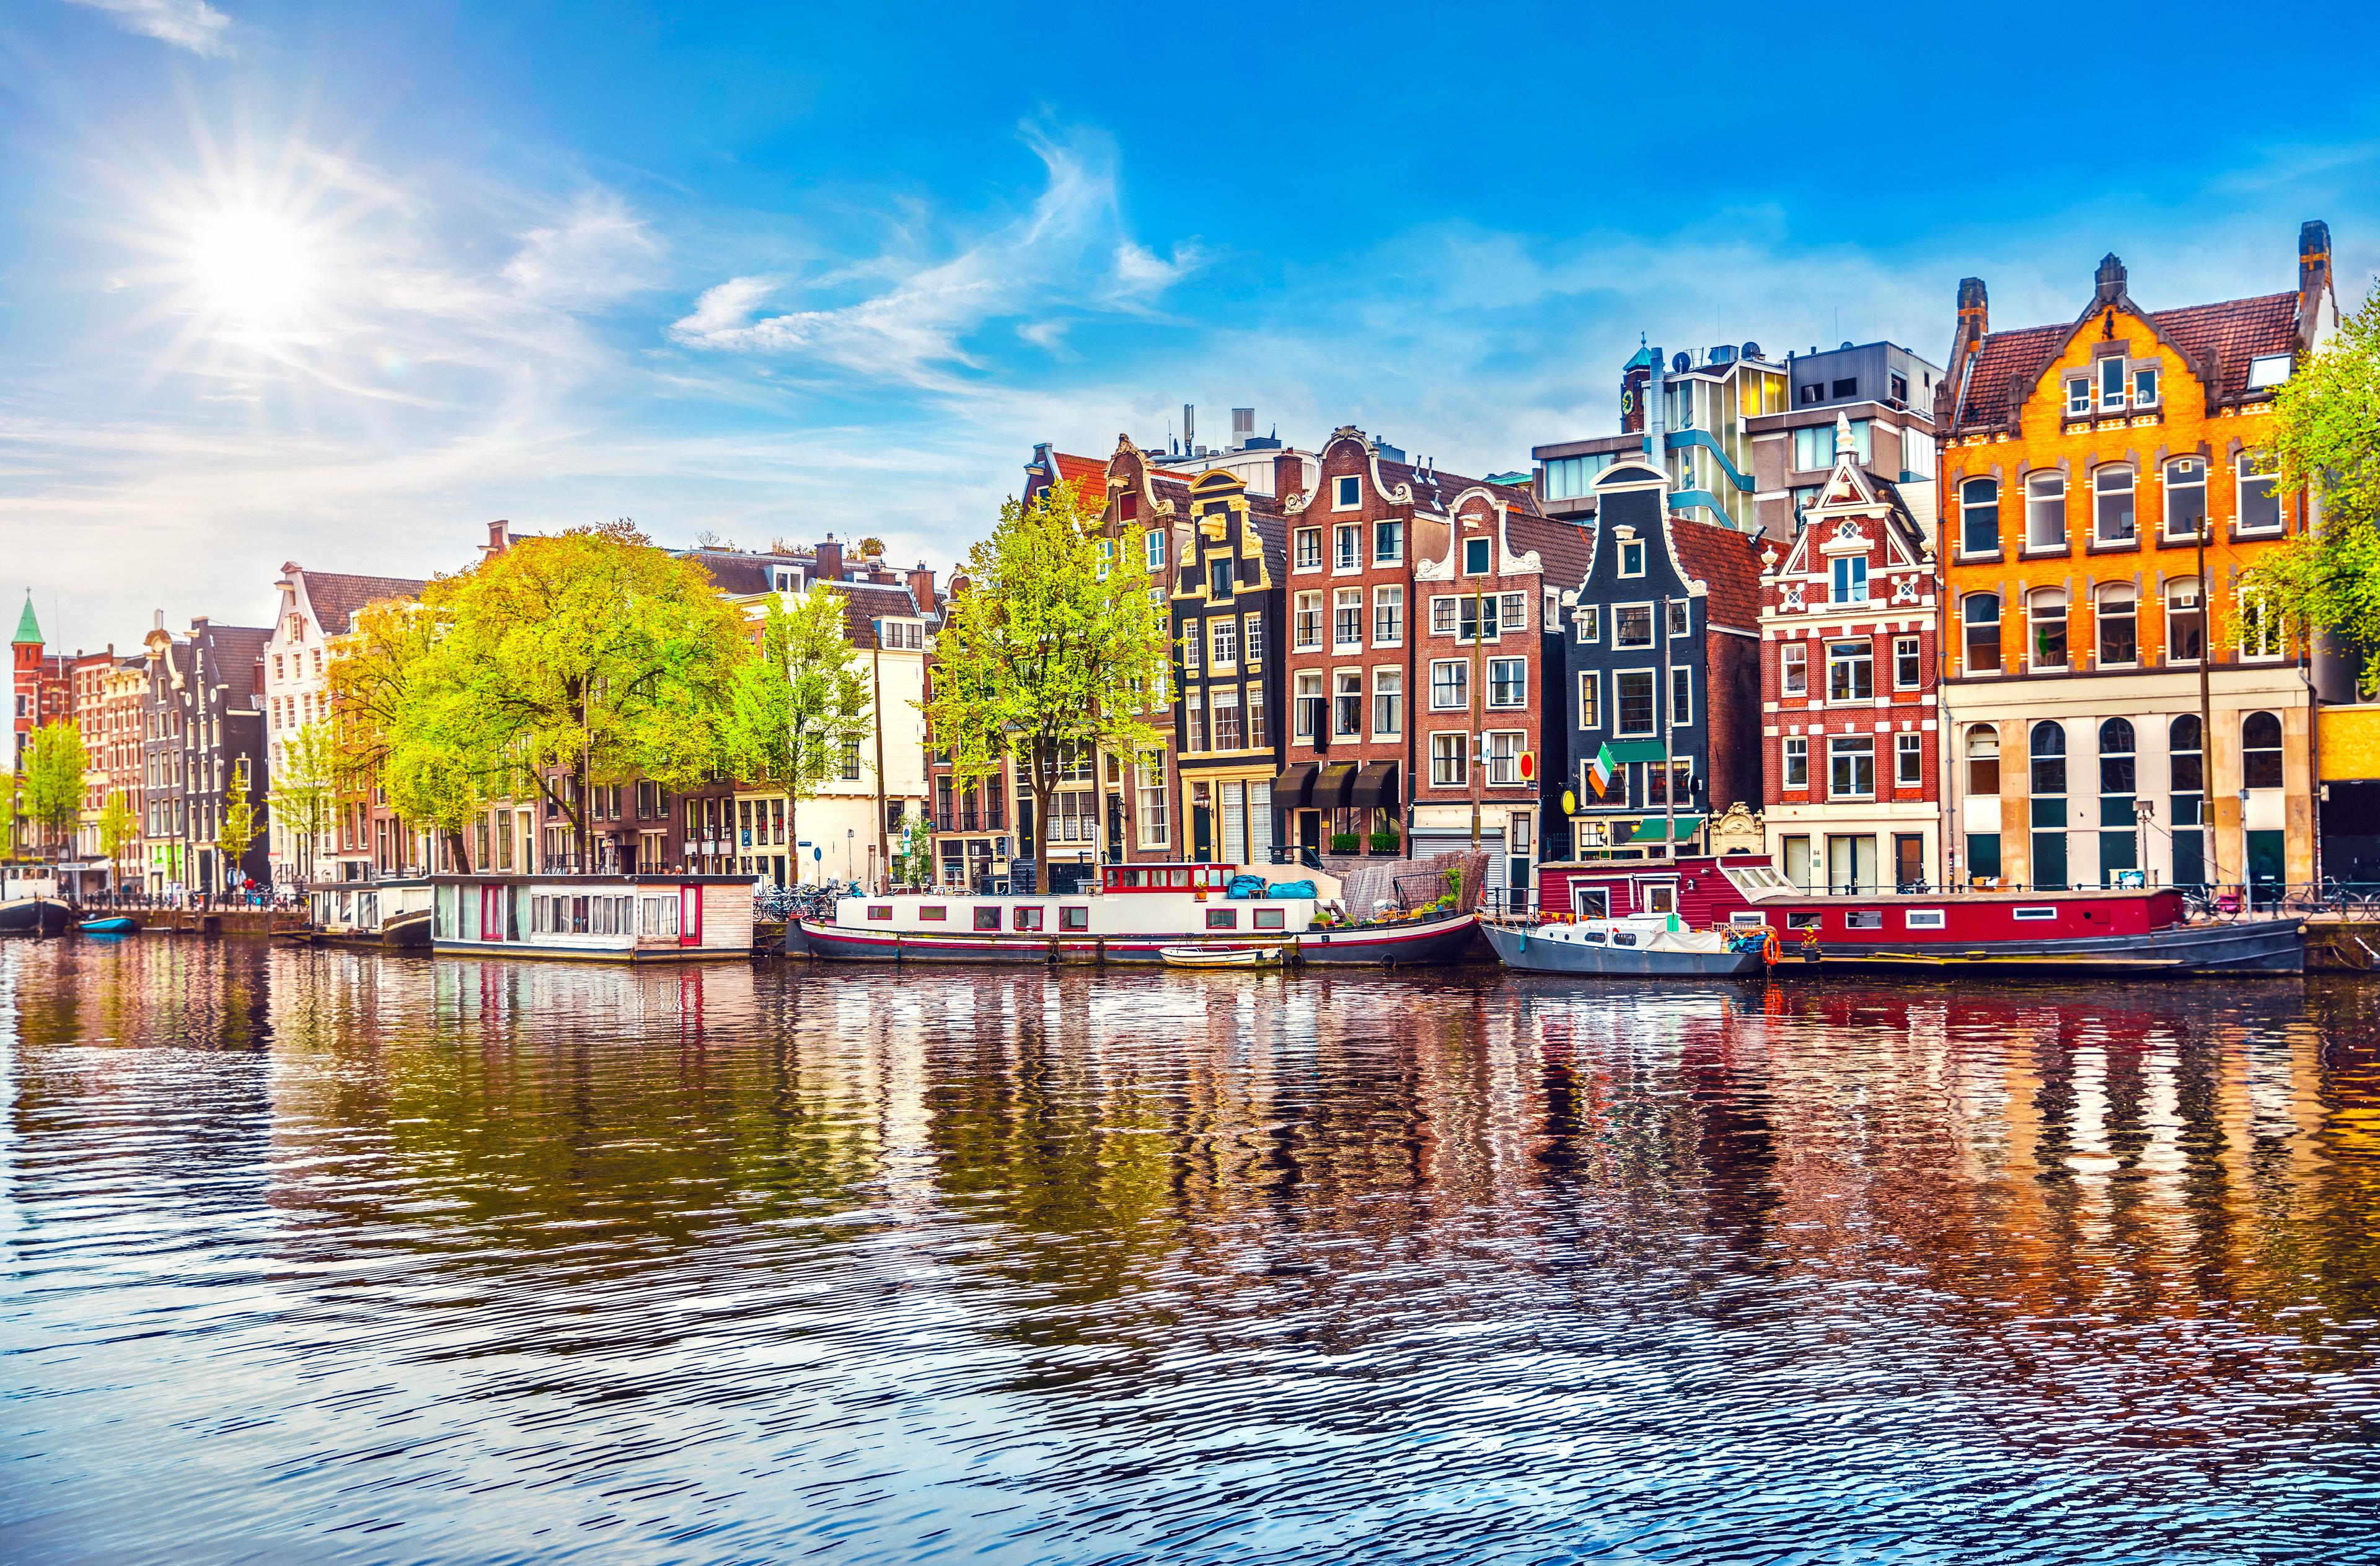 The Amsterdam city, cover photo